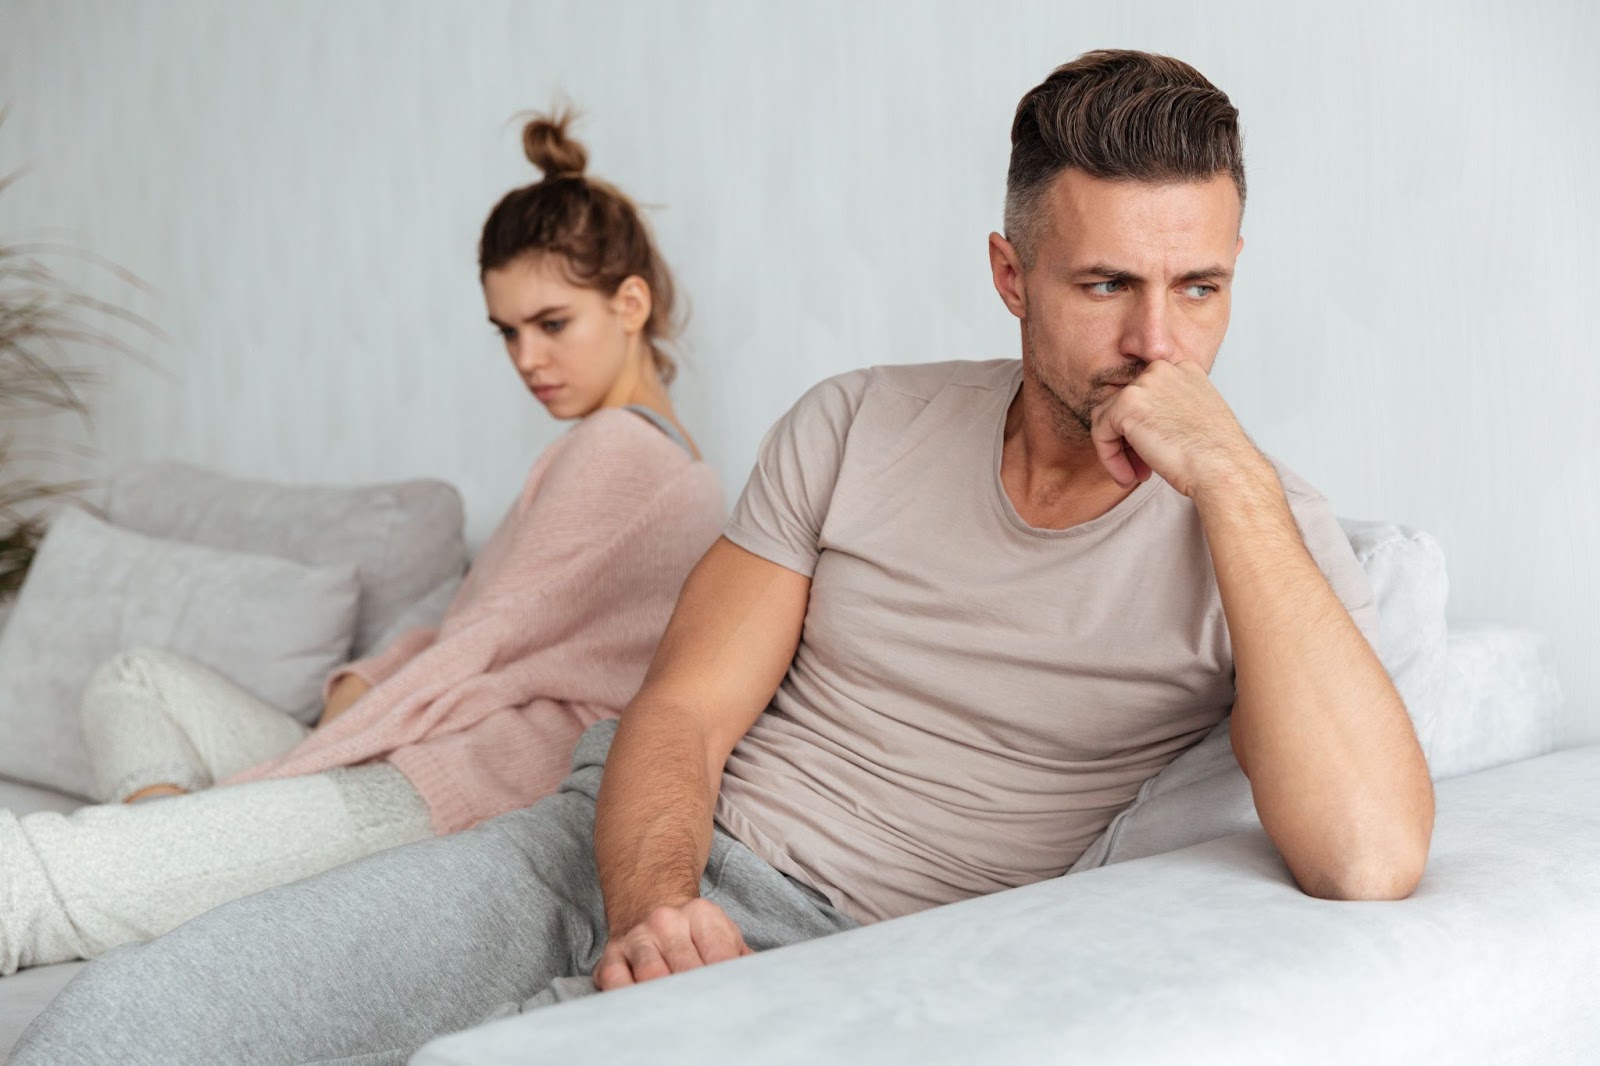 Man and woman sitting on a couch after an argument